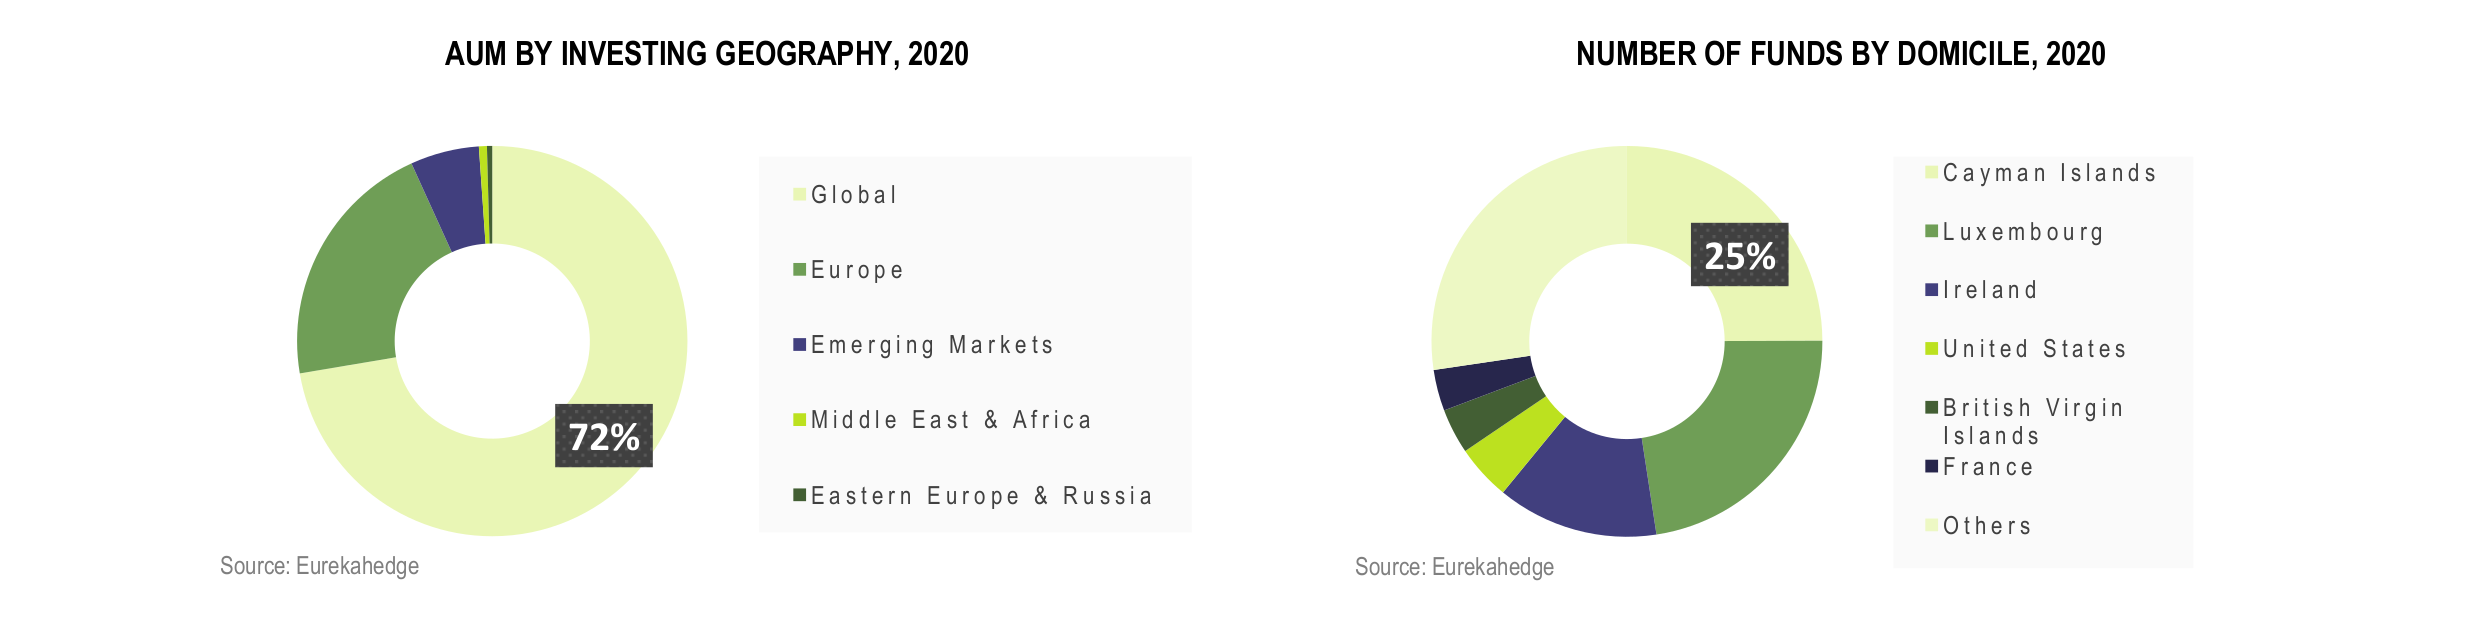 European Hedge Funds Infographic December 2020 - AUM by investing geography and domicile